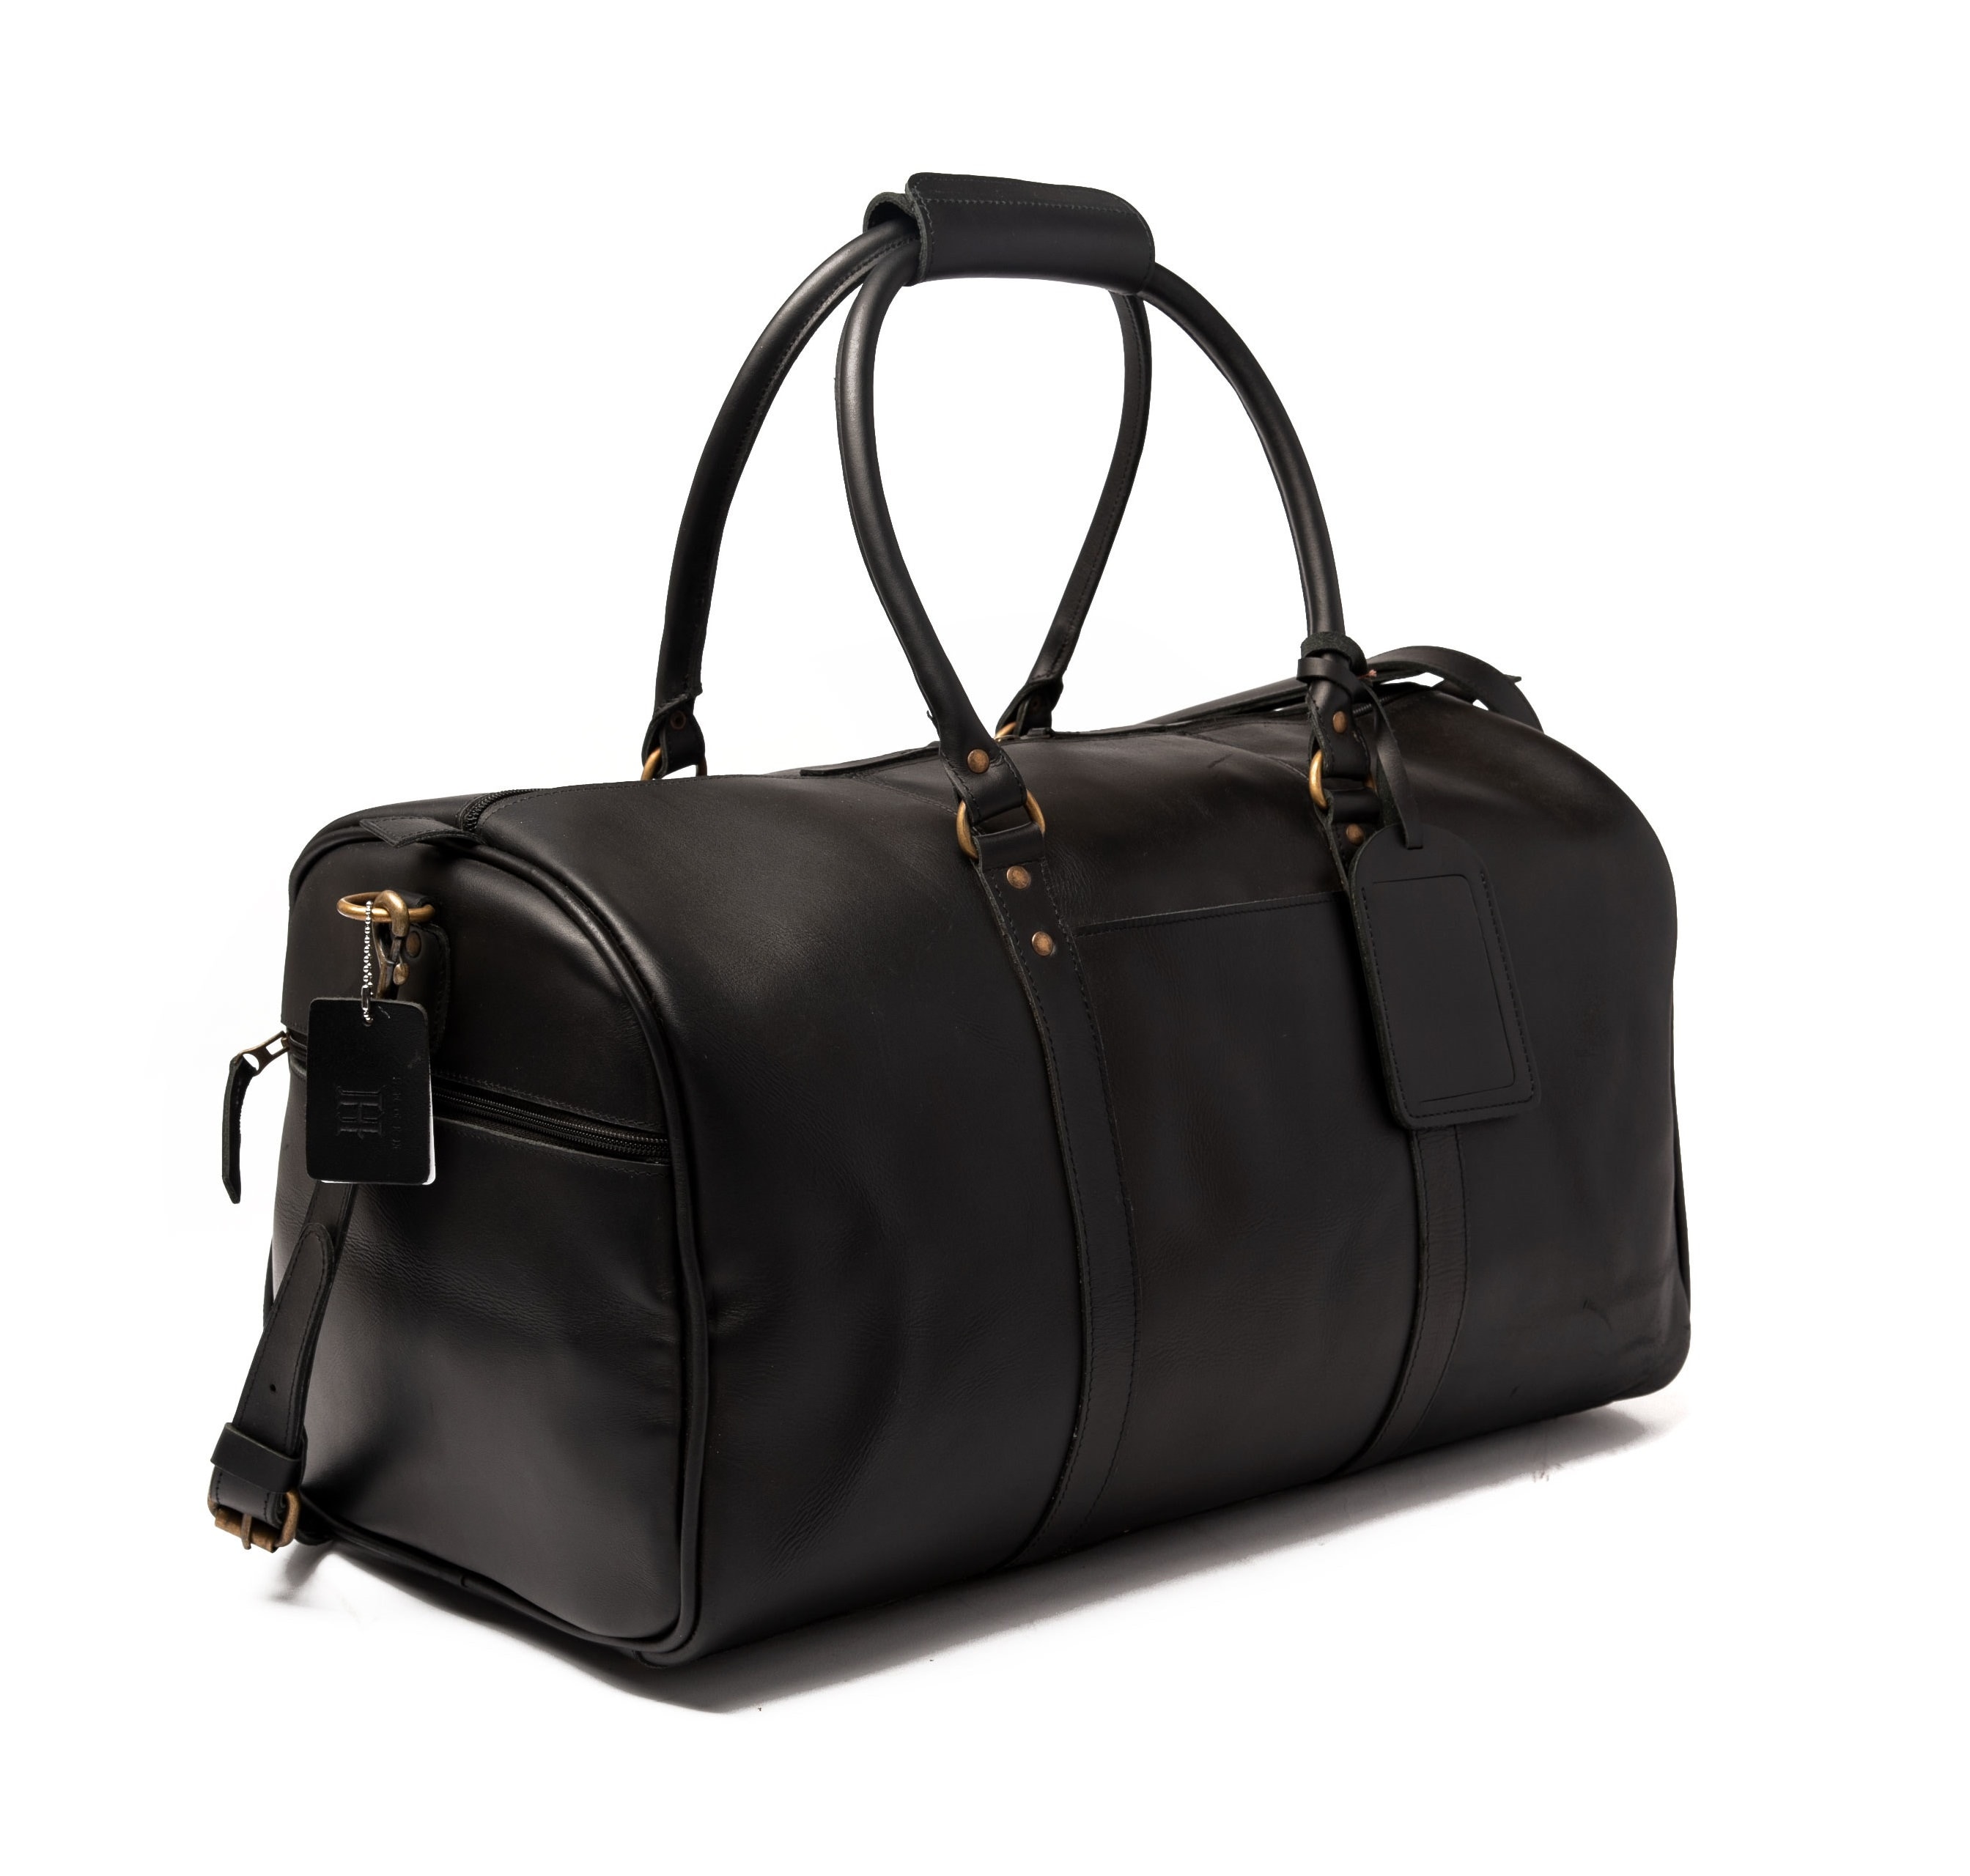 Leather Military Duffle Bag Black - Linden Is Enough